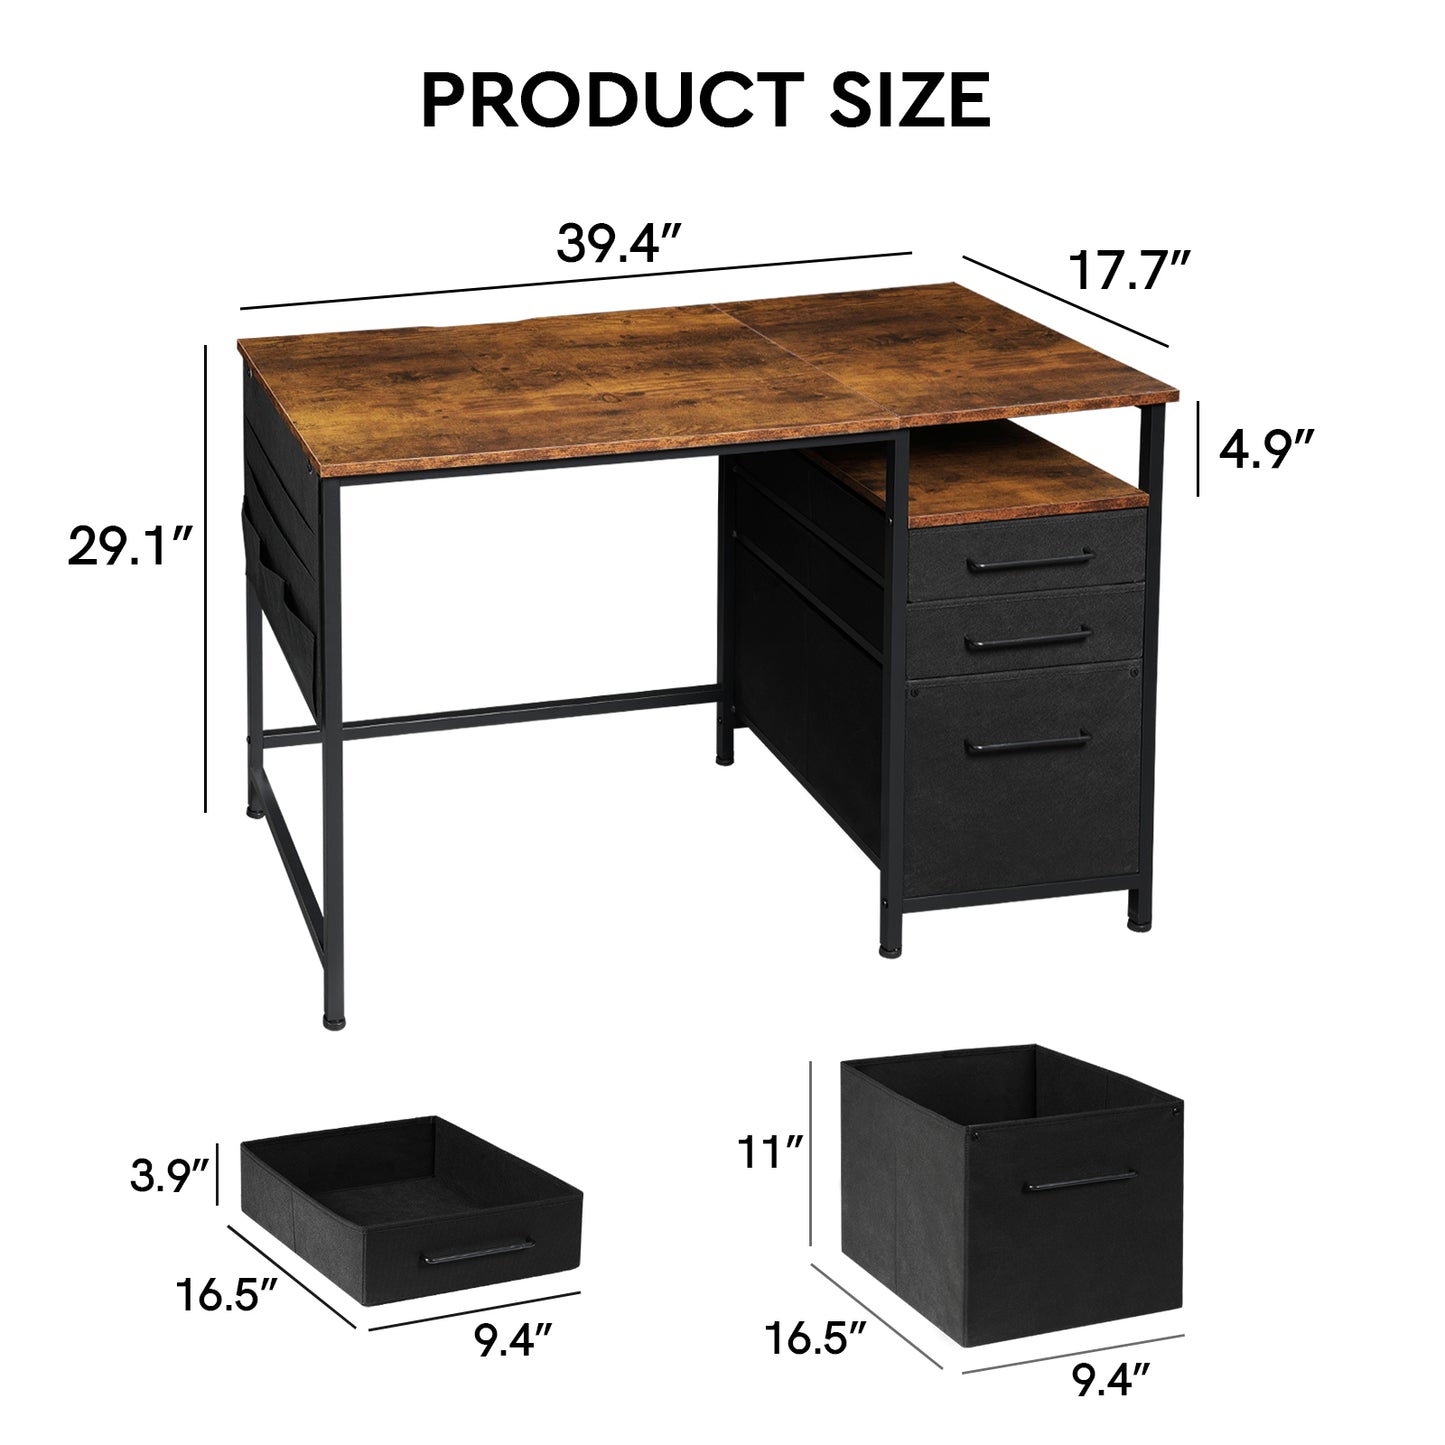 MAIHAIL 40 inch Desk with Drawers, Rustic Brown+ Black